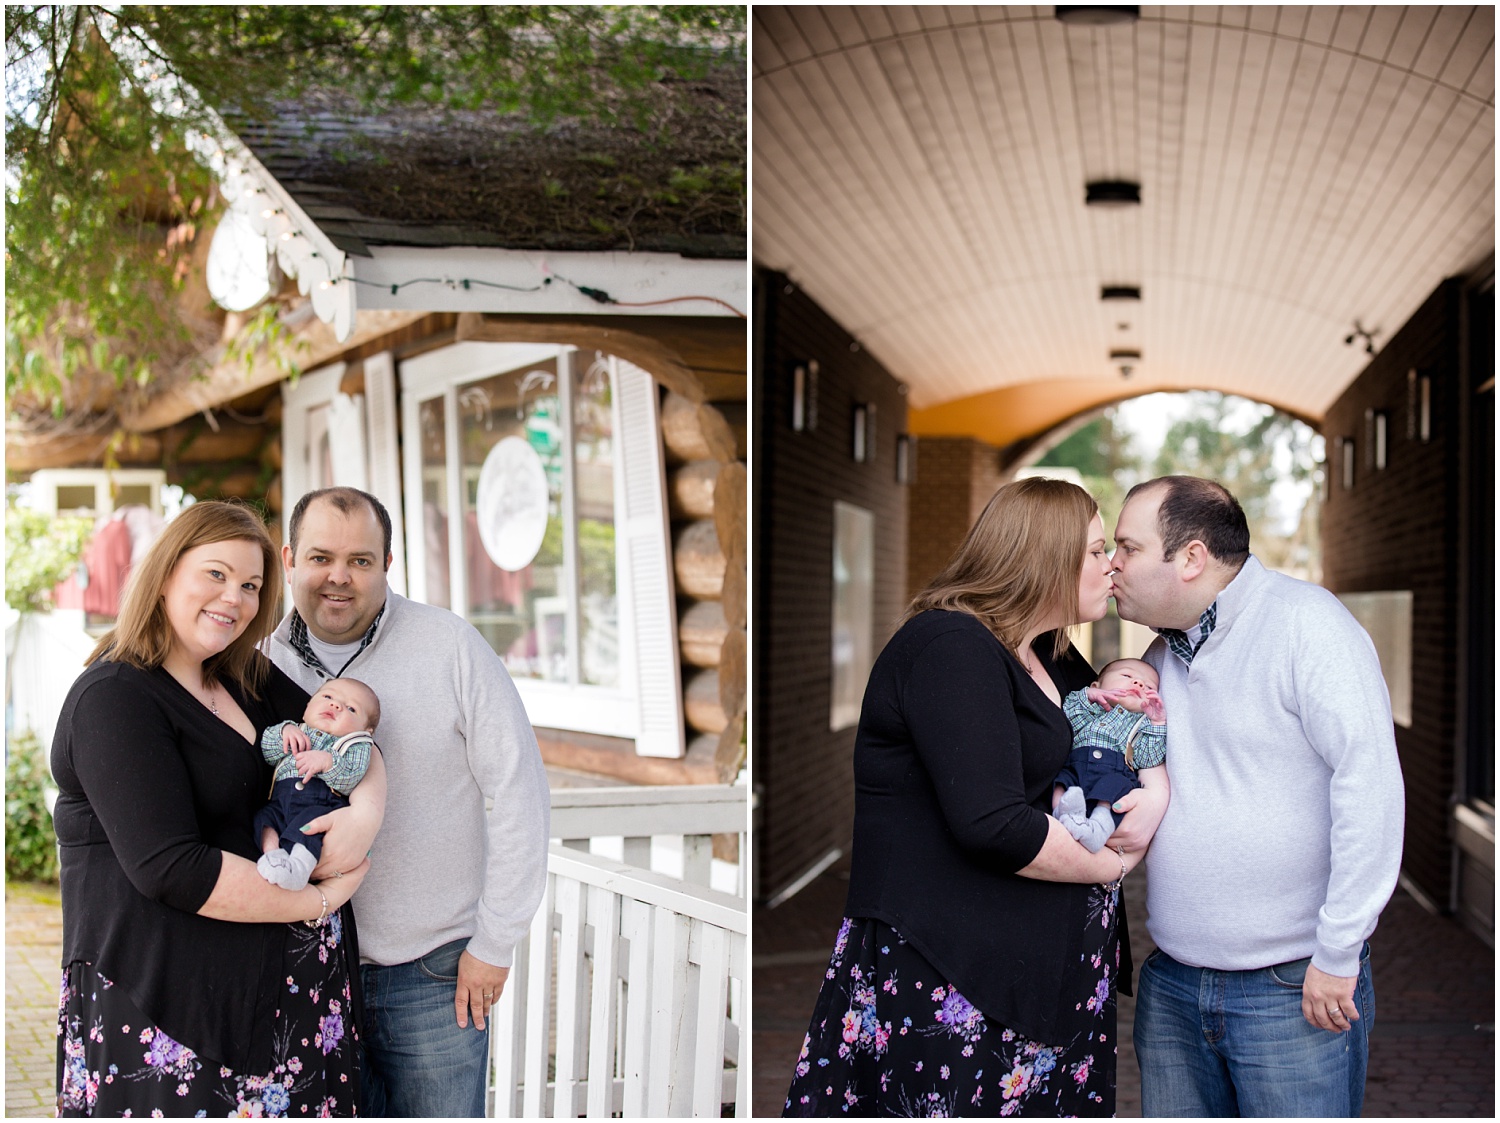 Amazing Day Photography - Fort Langley Family Session - Langley Family Photographer (11).jpg